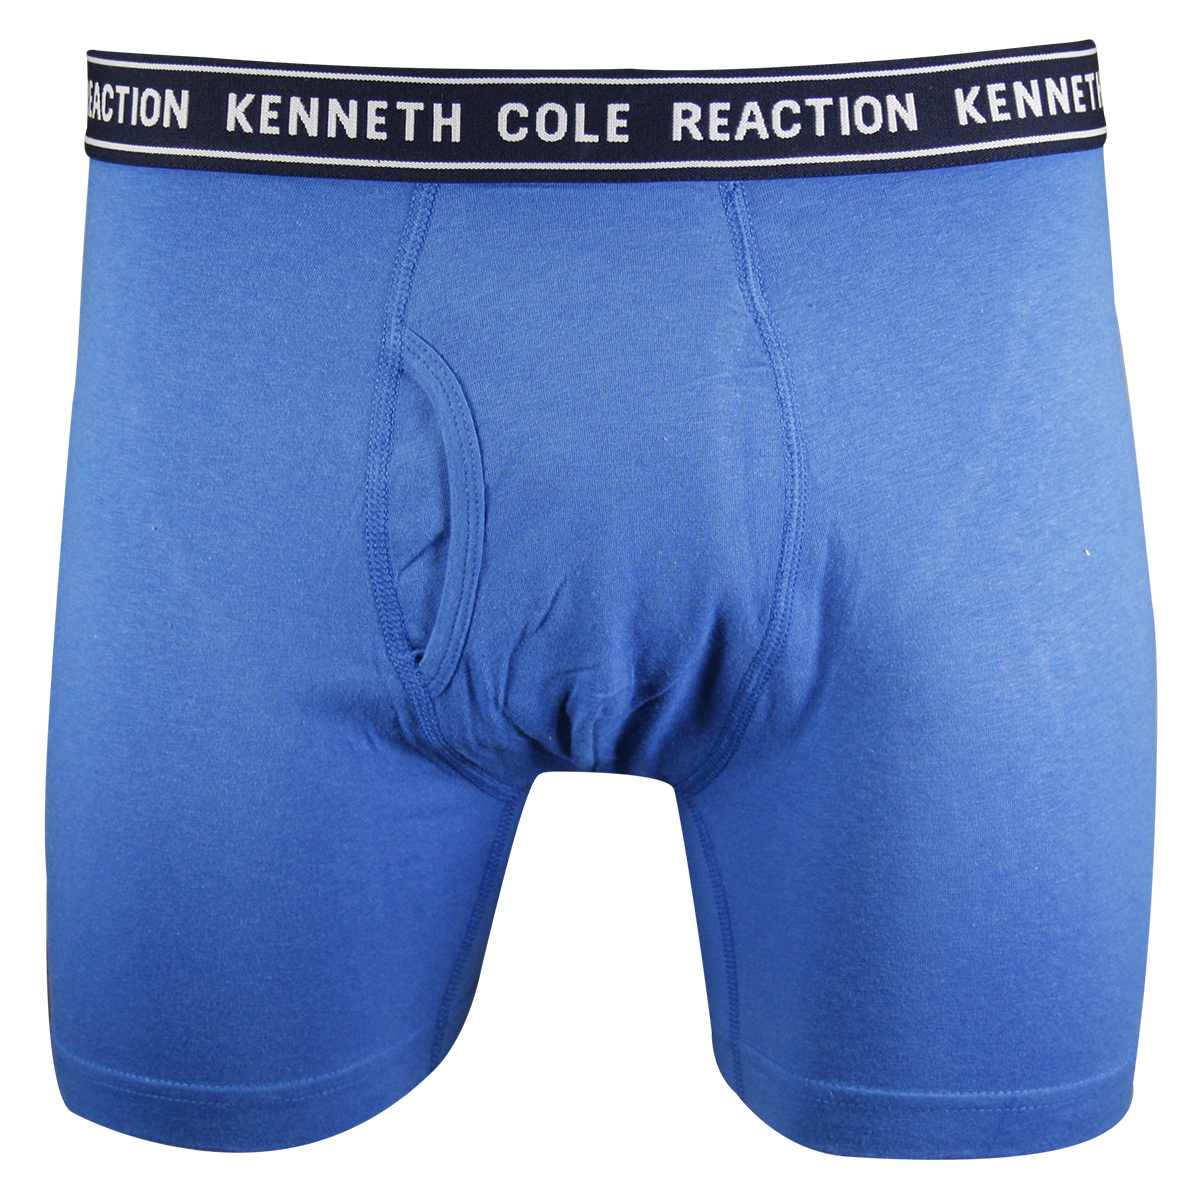 Kenneth Cole Men's Reaction 1 Pack Navy Band Blue Boxer Brief (S04)